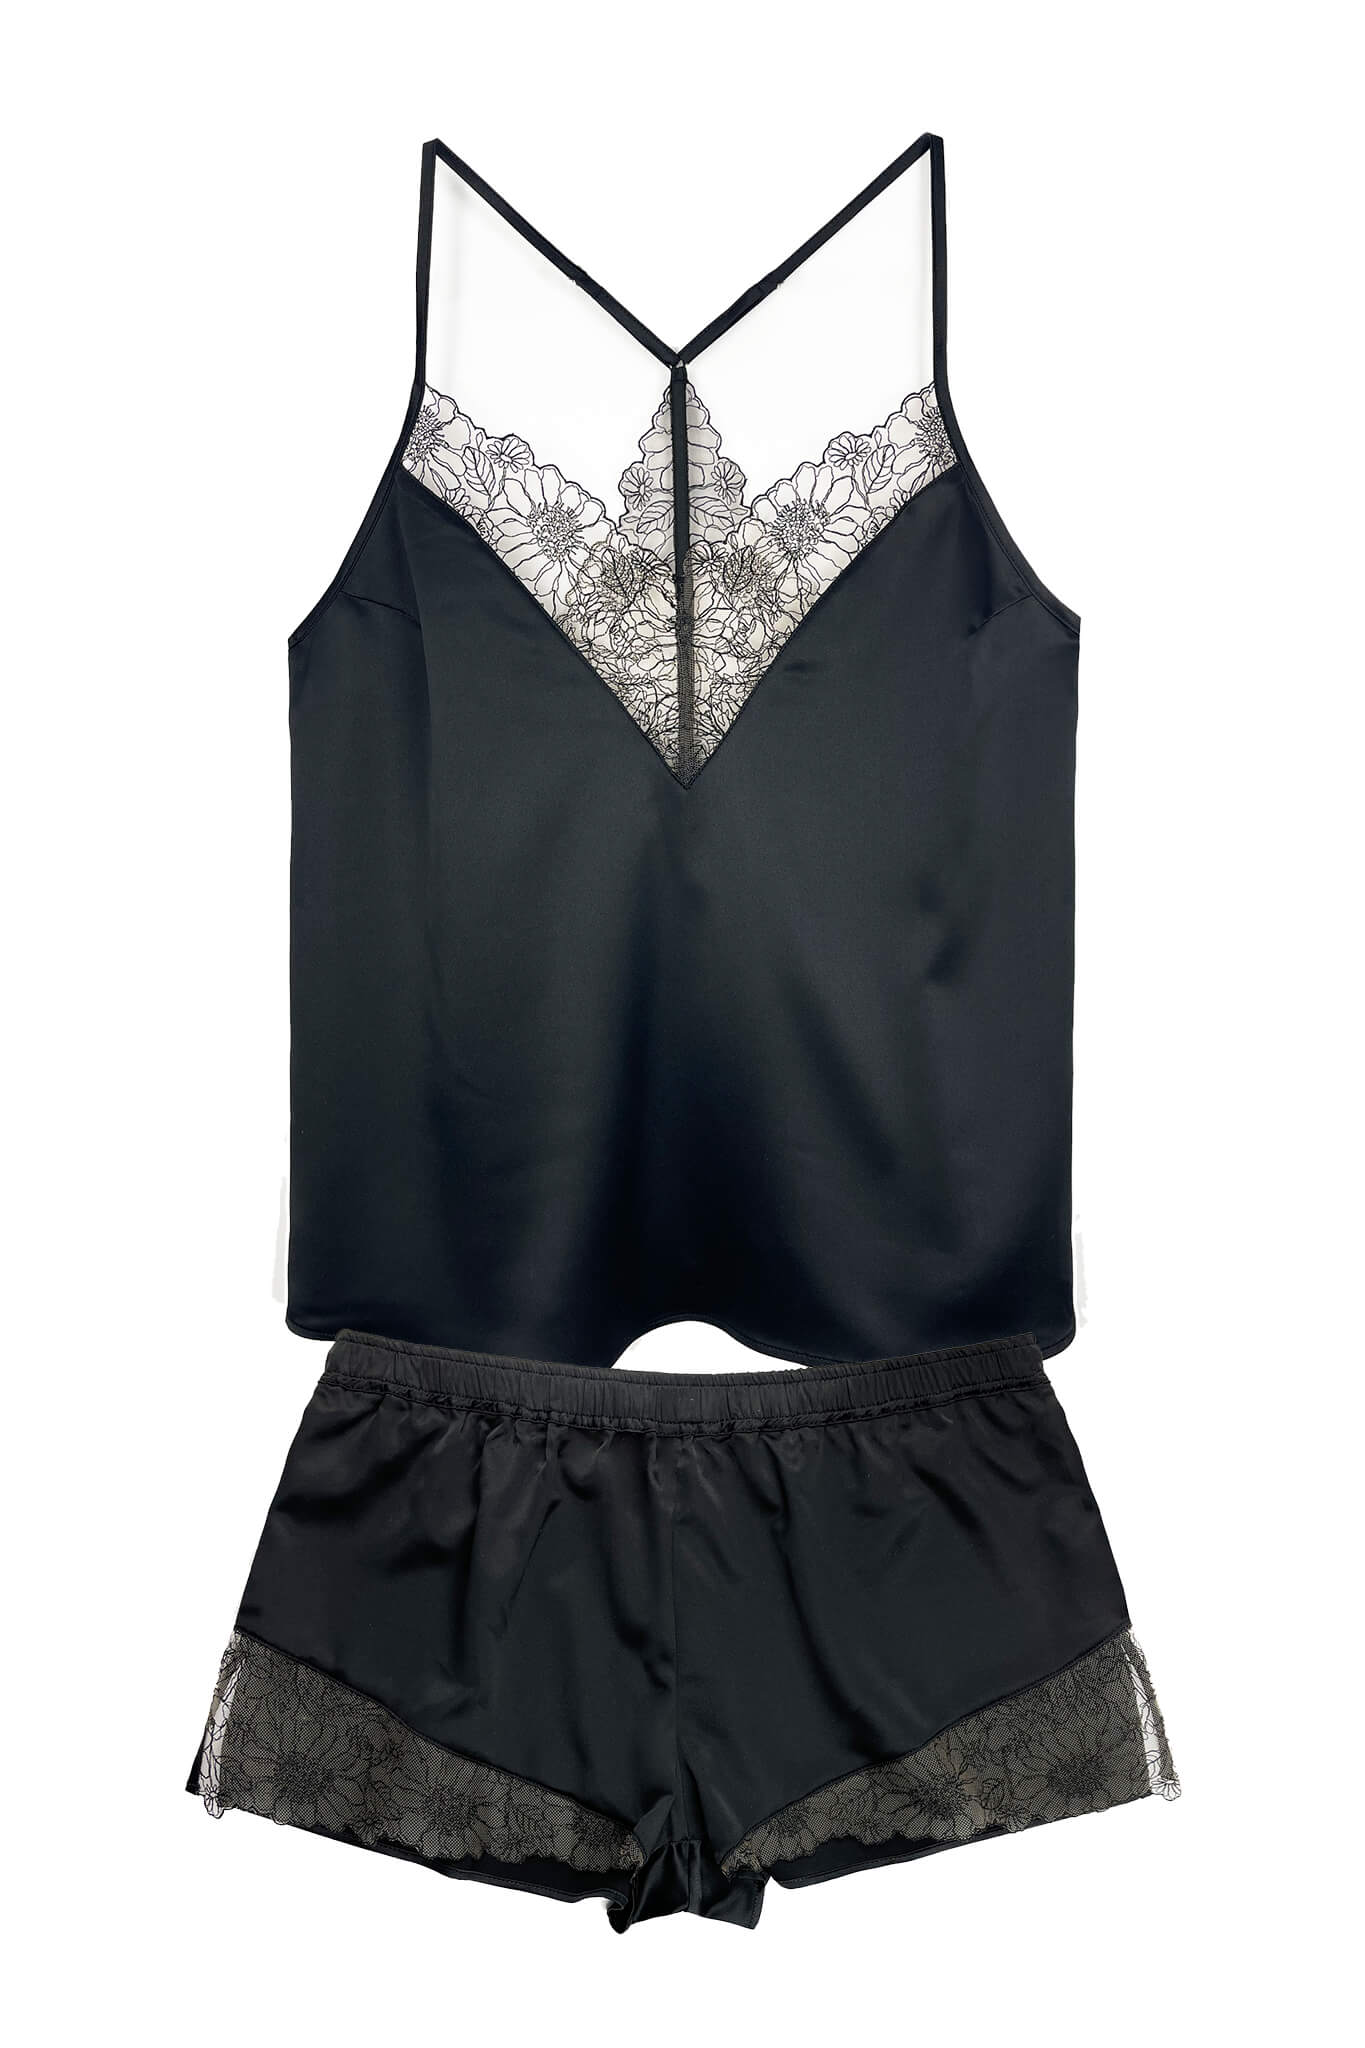 Candid Satin Cami & Shorts Set • Black Lingerie w Embroidered Lace ...